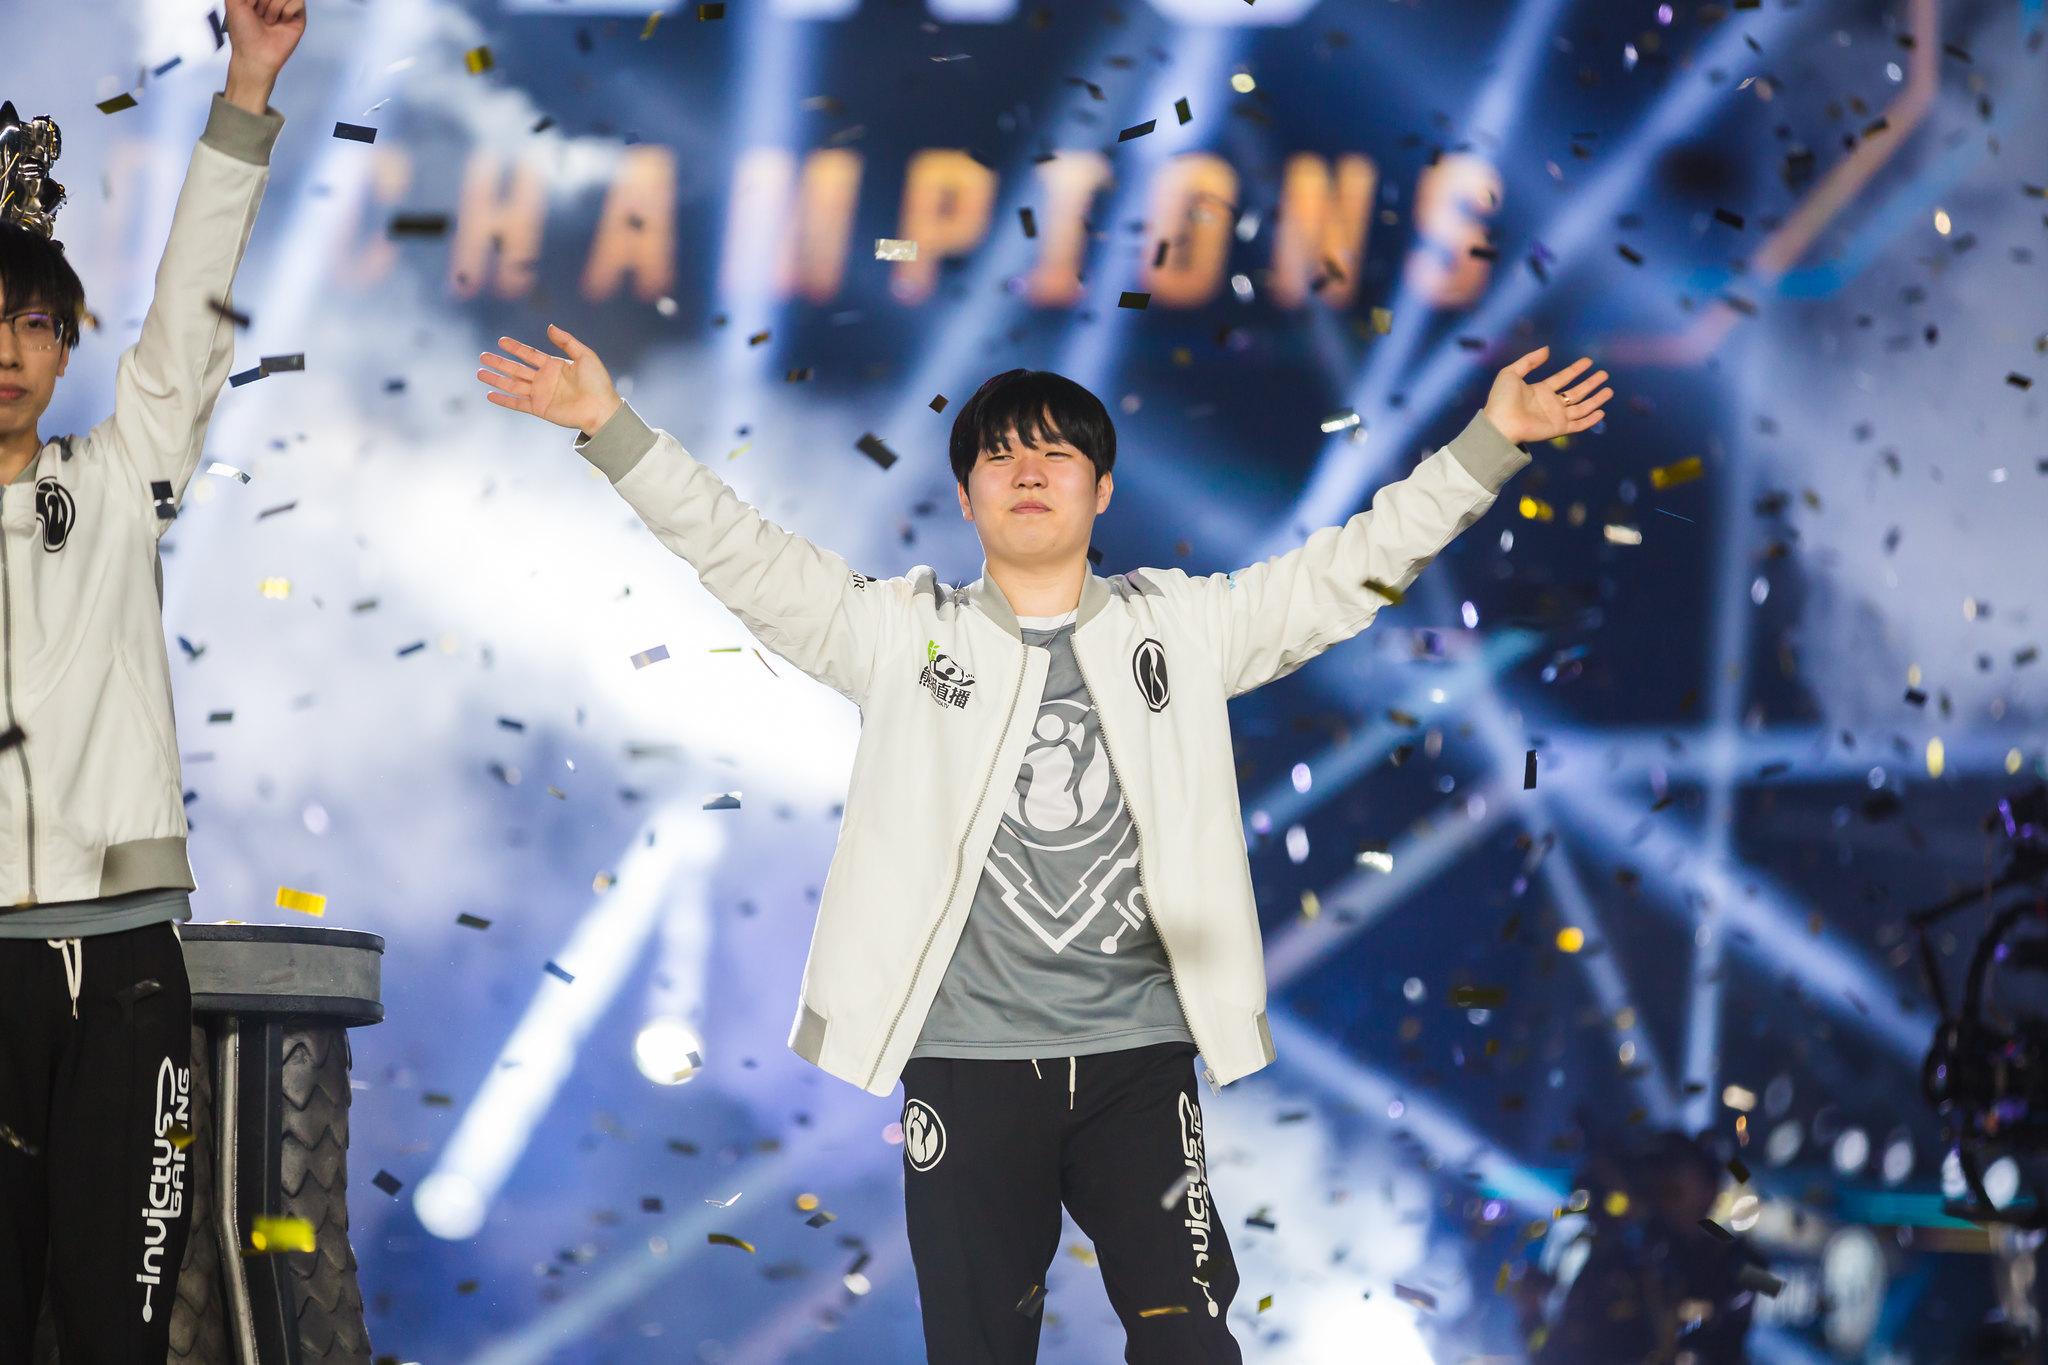 Rookie celebrating victory at Worlds 2018